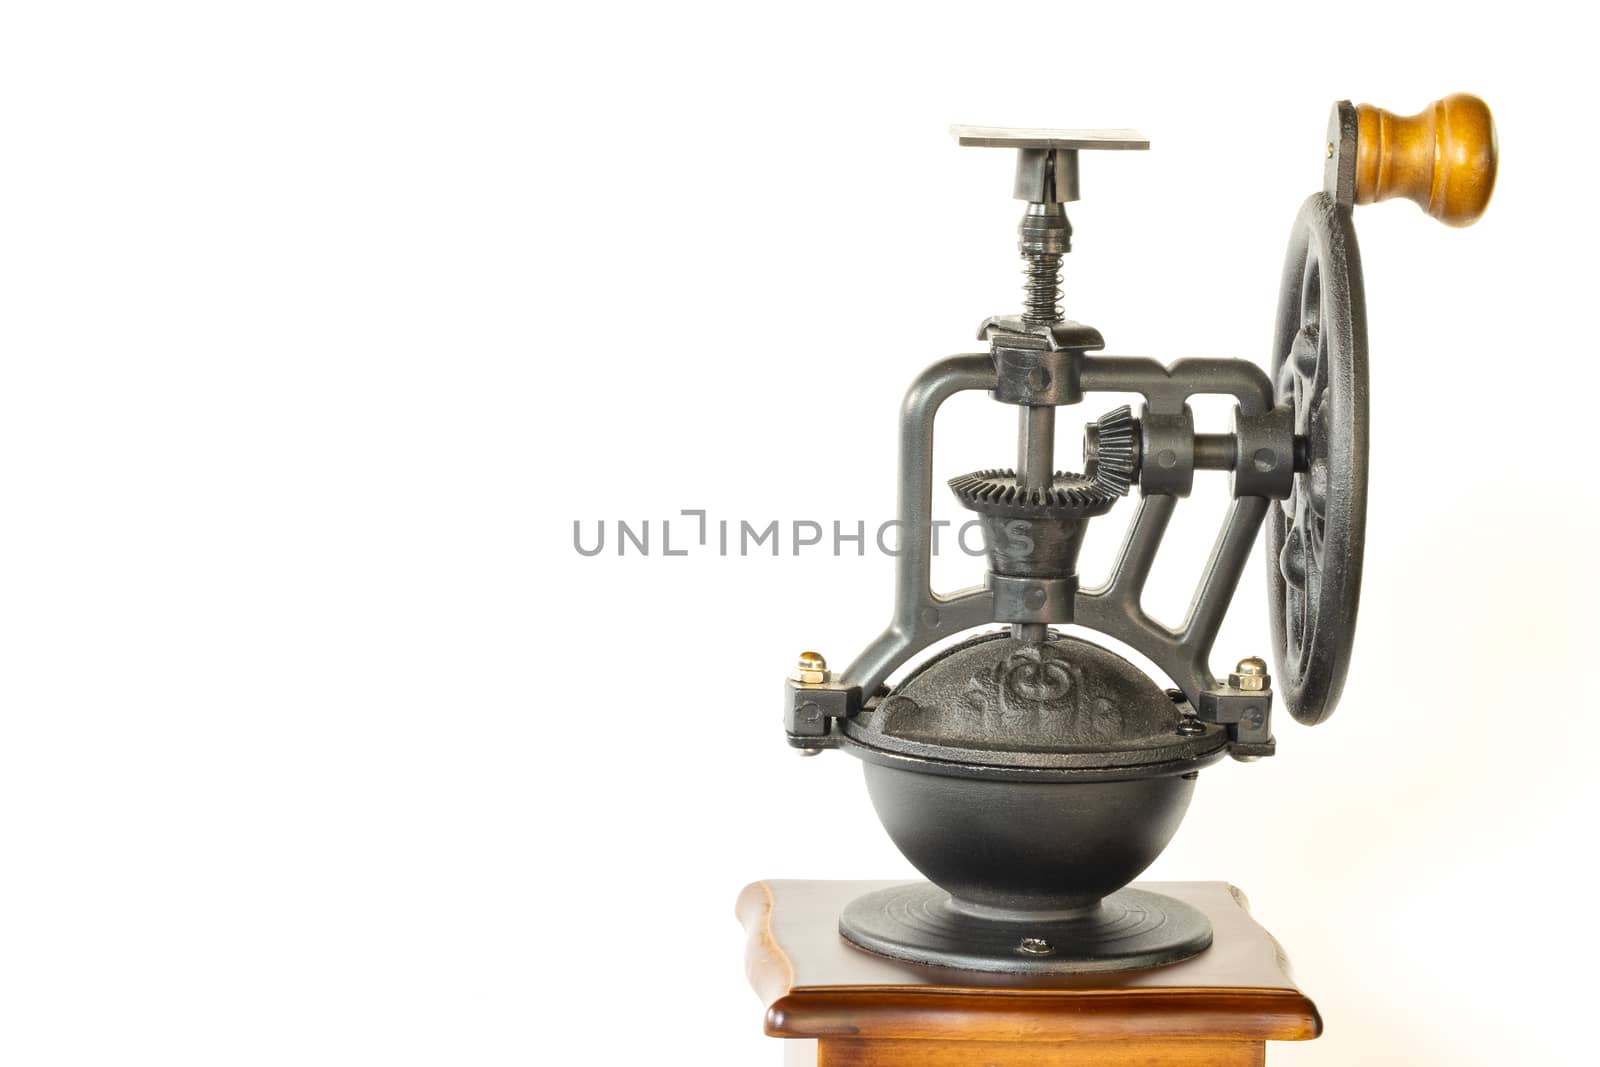 a vintage coffee grinder with intricate metal part, isolated on white background